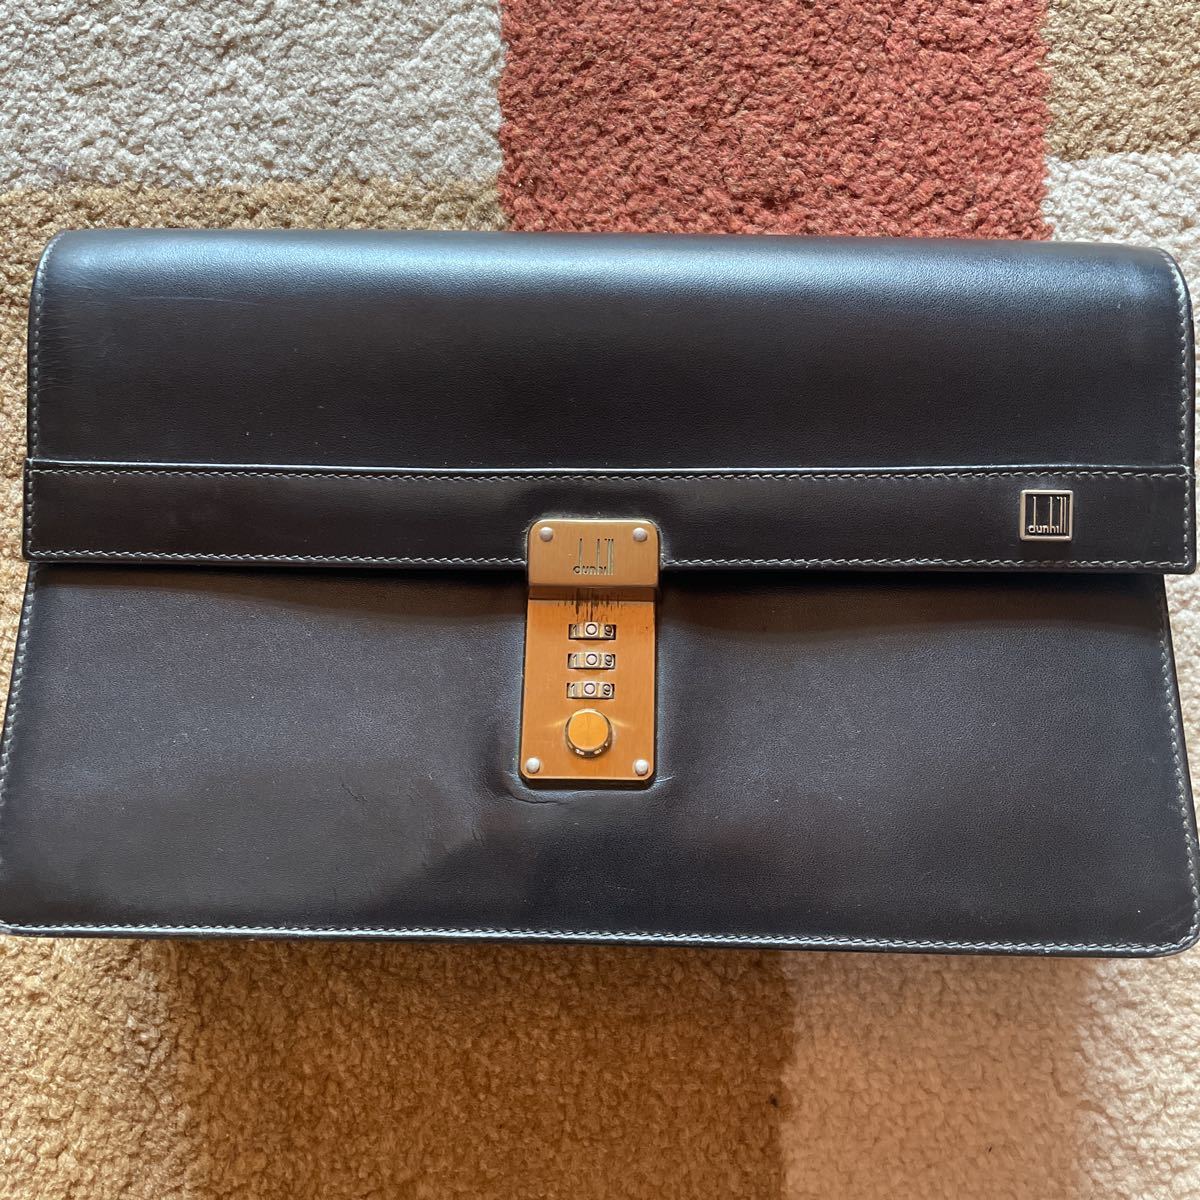  Dunhill second bag dunhill dial lock clutch bag leather 